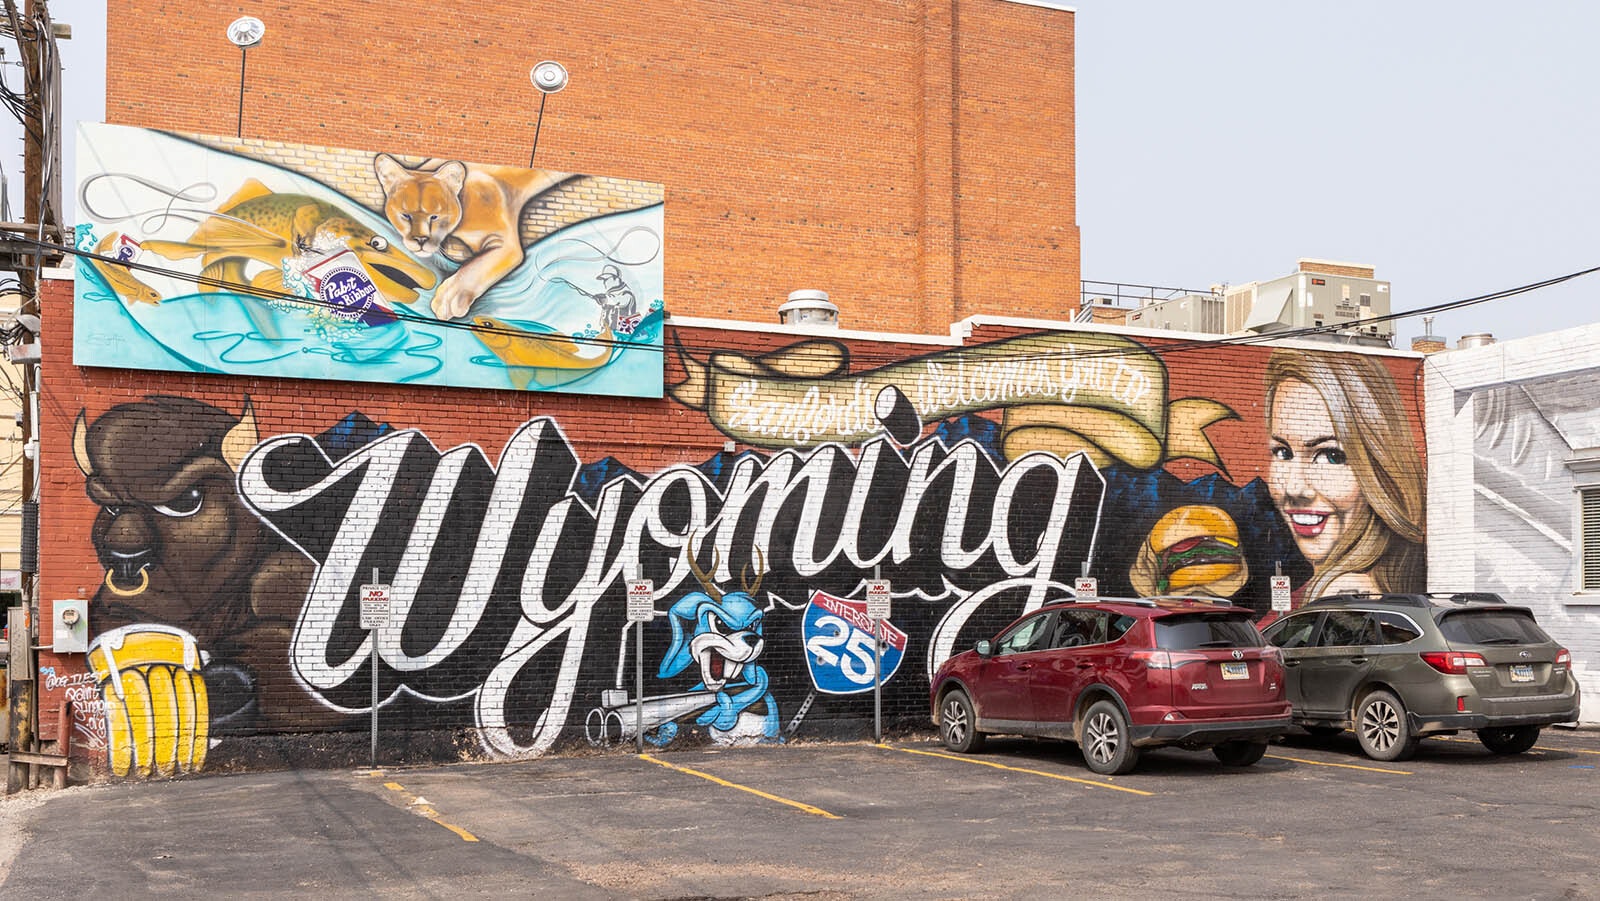 The back wall of Sanford's Grub & Pub on East 17th Street in downtown Cheyenne is an artistic tribute to the Cowboy State. It's one of dozens of colorful and cutting-edge murals around Wyoming's capital city.